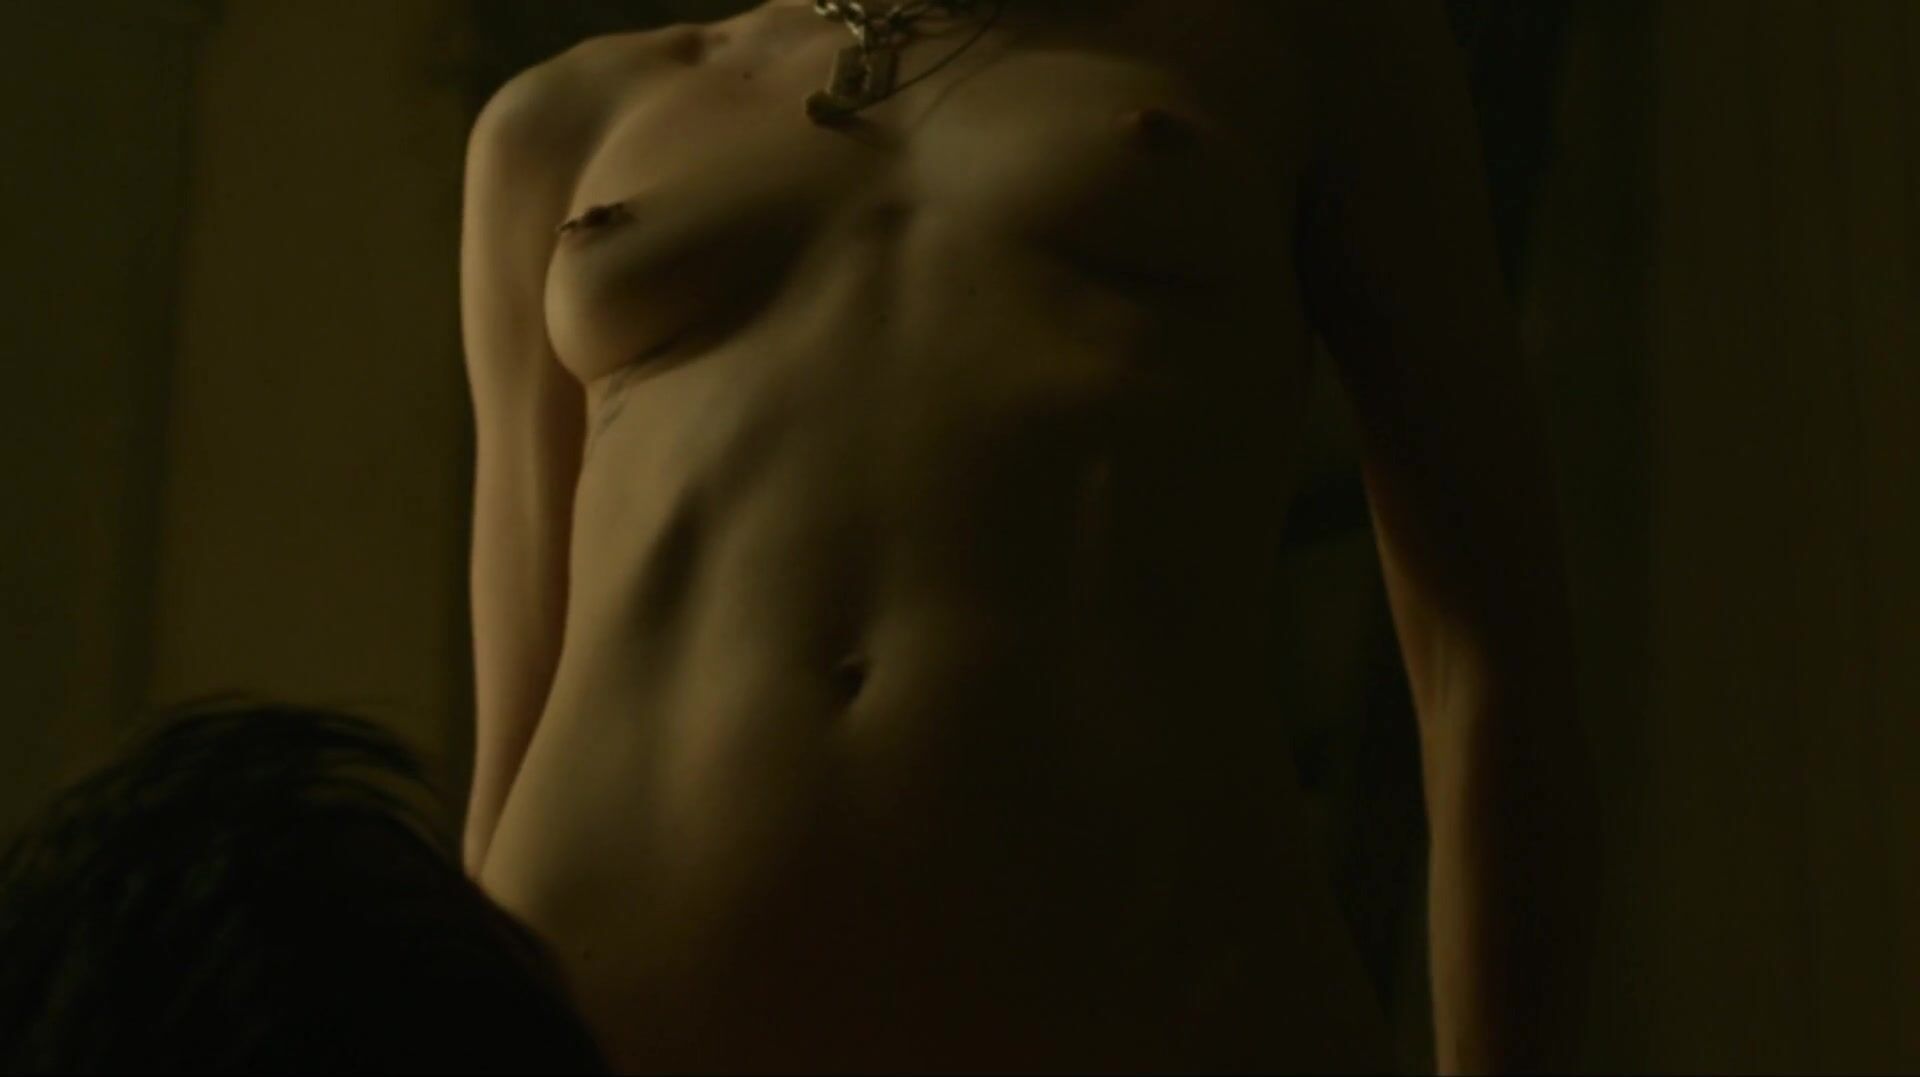 Charley Chase Men hump Rooney Mara with her consent or without it in Girl With The Dragon Tattoo Gay Toys